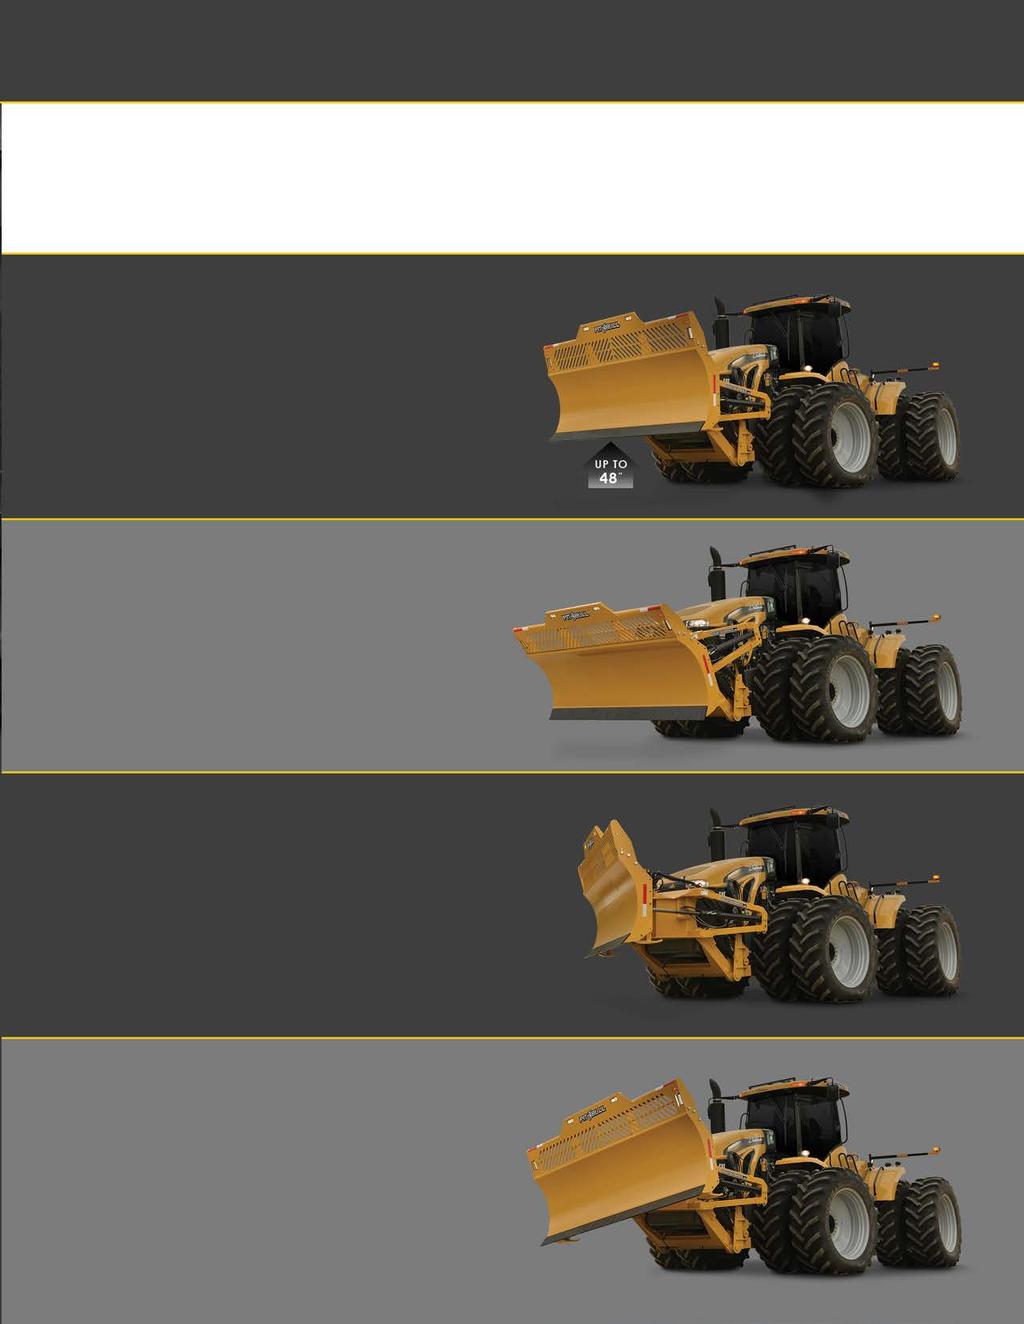 8-WAY BLADE CONTROL Take command and control on each pass, putting silage, dirt and snow exactly where you want it with Pitbull s available 8-way blade control, including parallel lift and forward